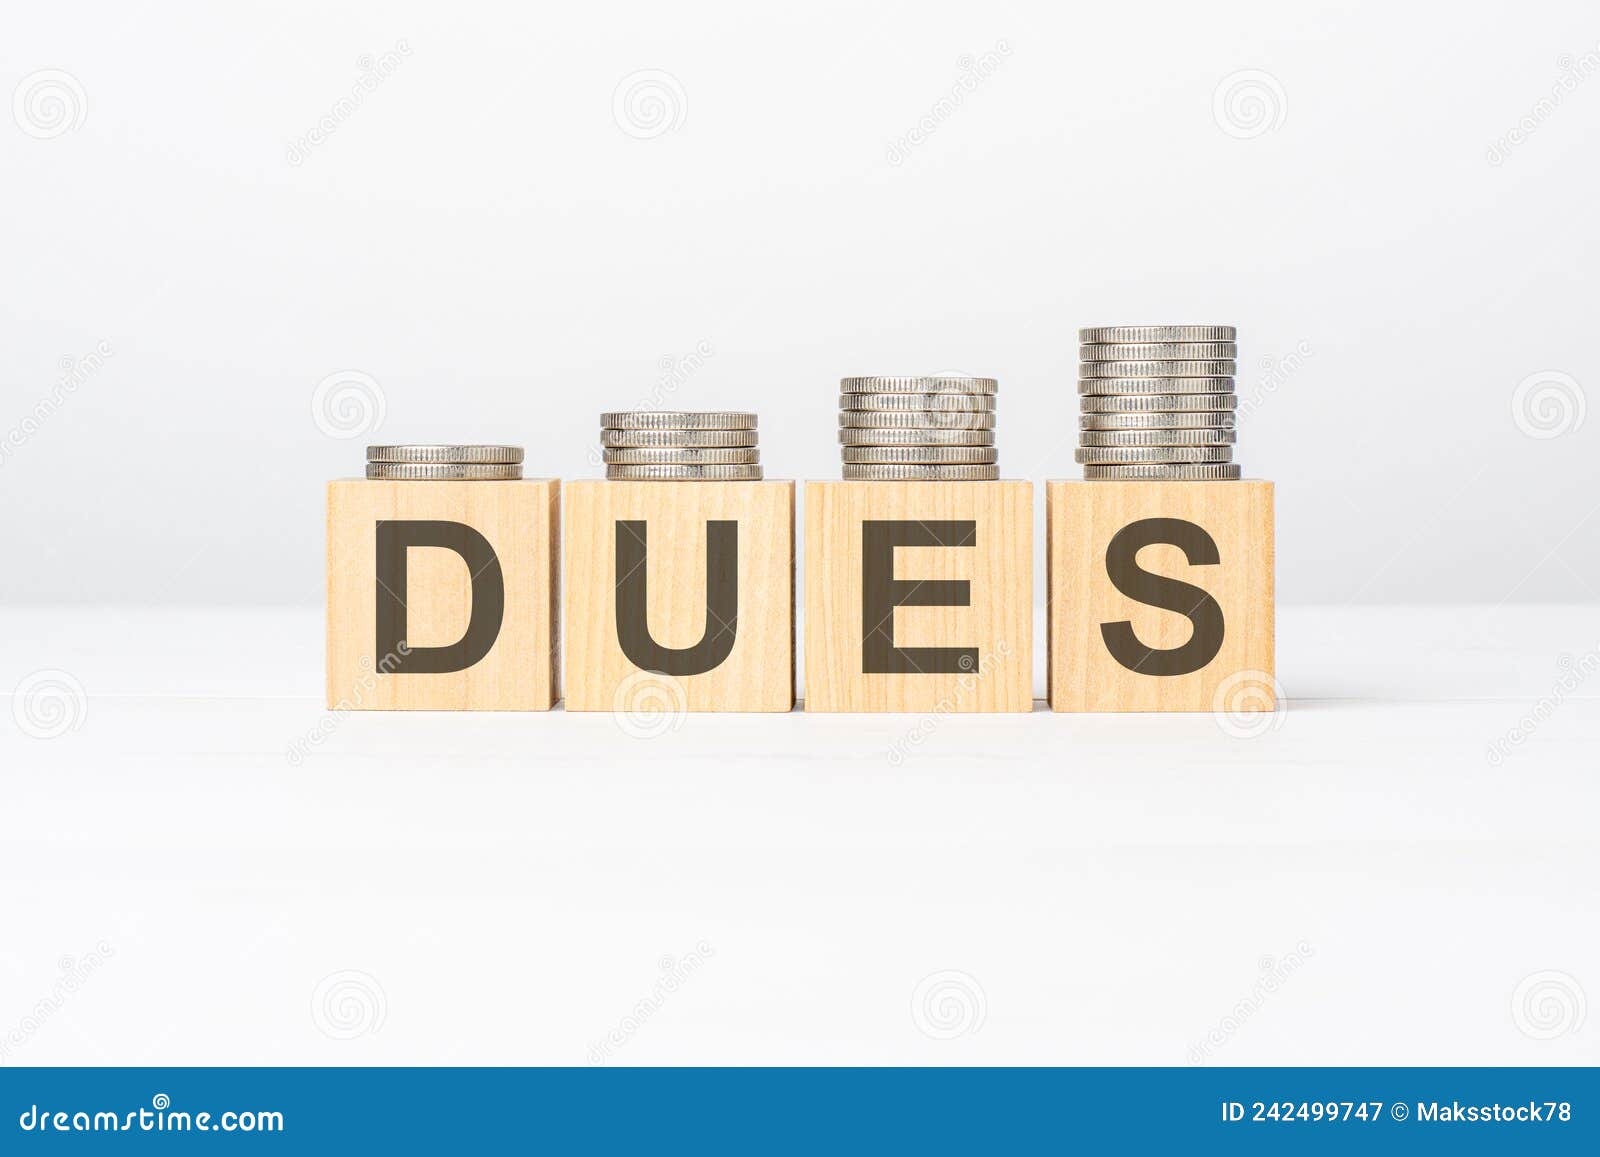 dues text written on wooden block with stacked coins on white background